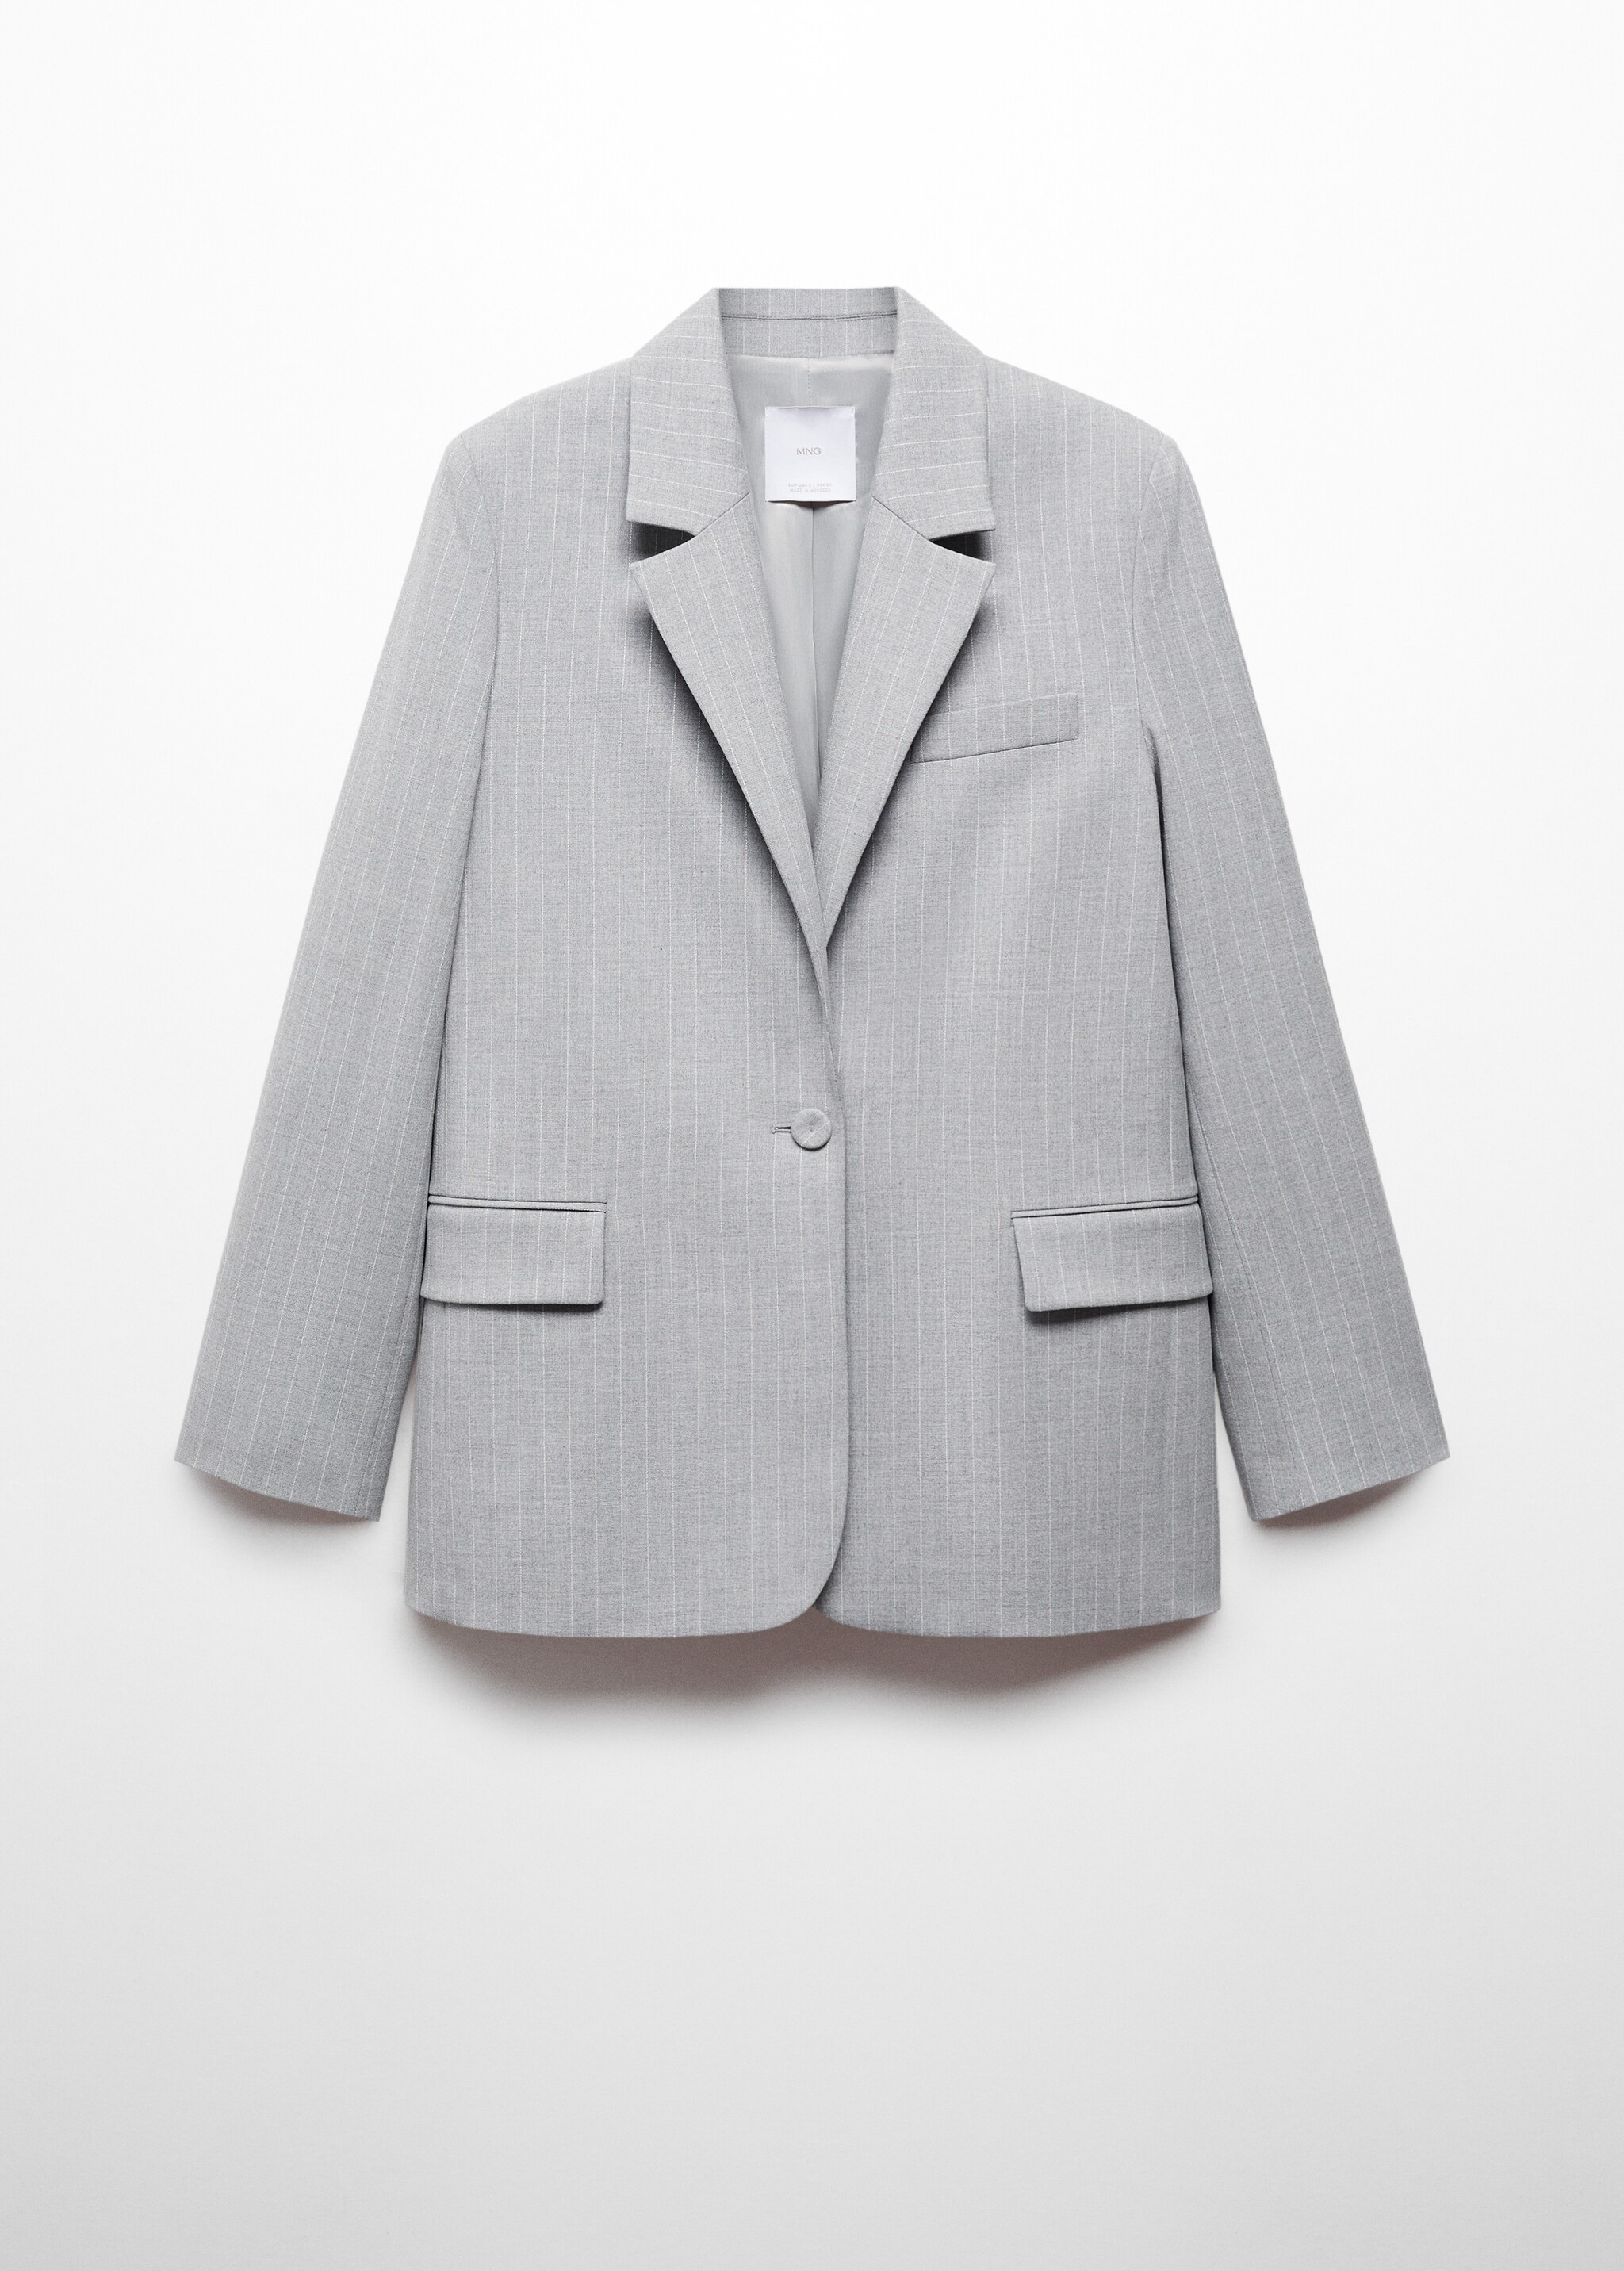 Pinstripe suit blazer - Article without model